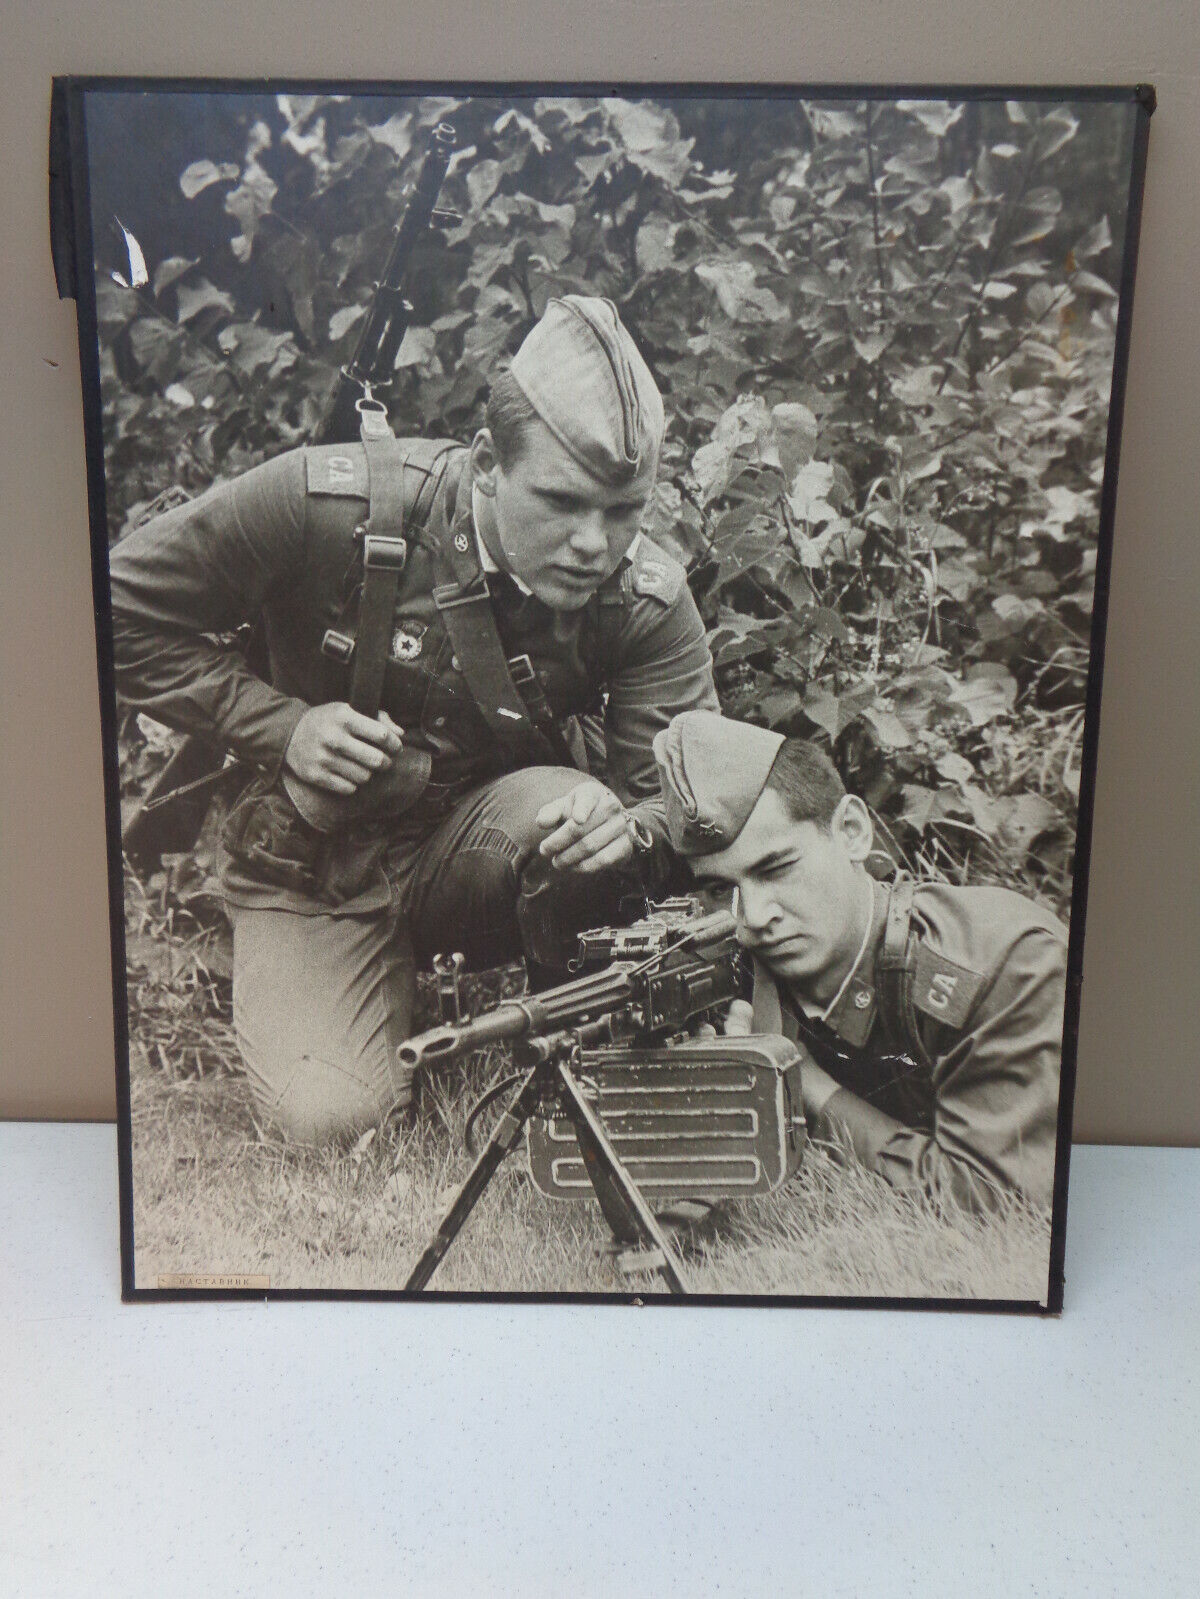 Large 22x18 Russian Army SMGT Training Photo Poster on Board Propaganda USSR